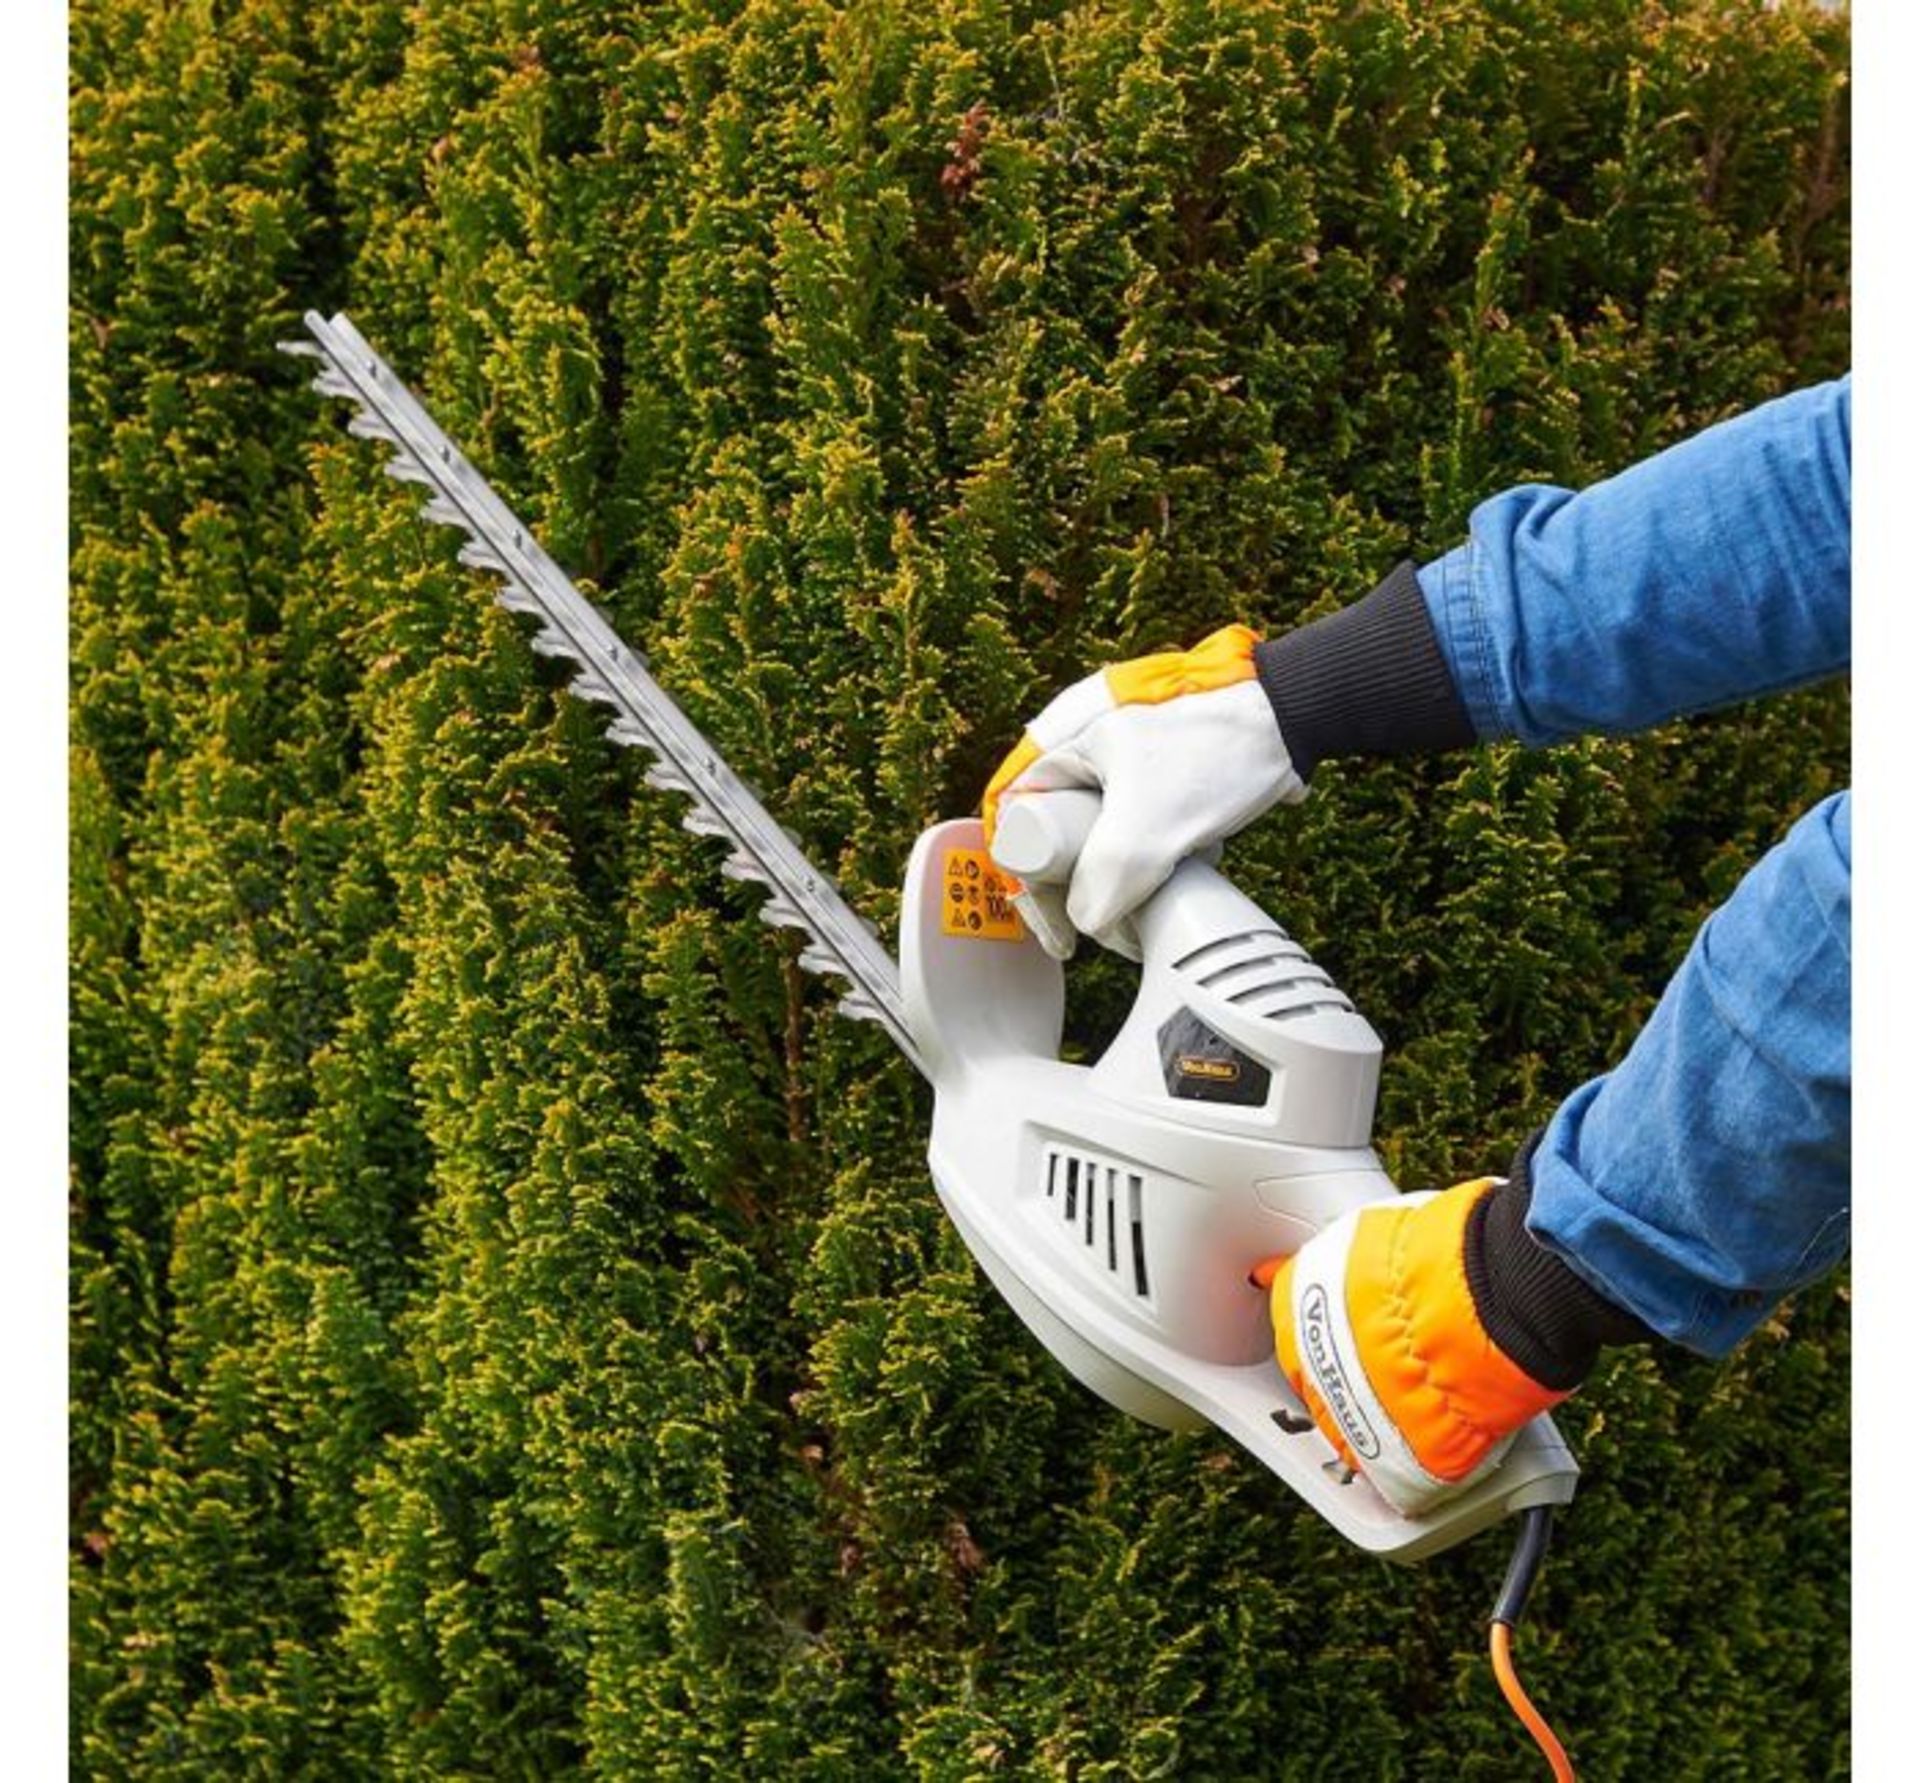 (GL8) 450W Hedge Trimmer 450W motor and precision blades deliver a fast cutting motion - easil...